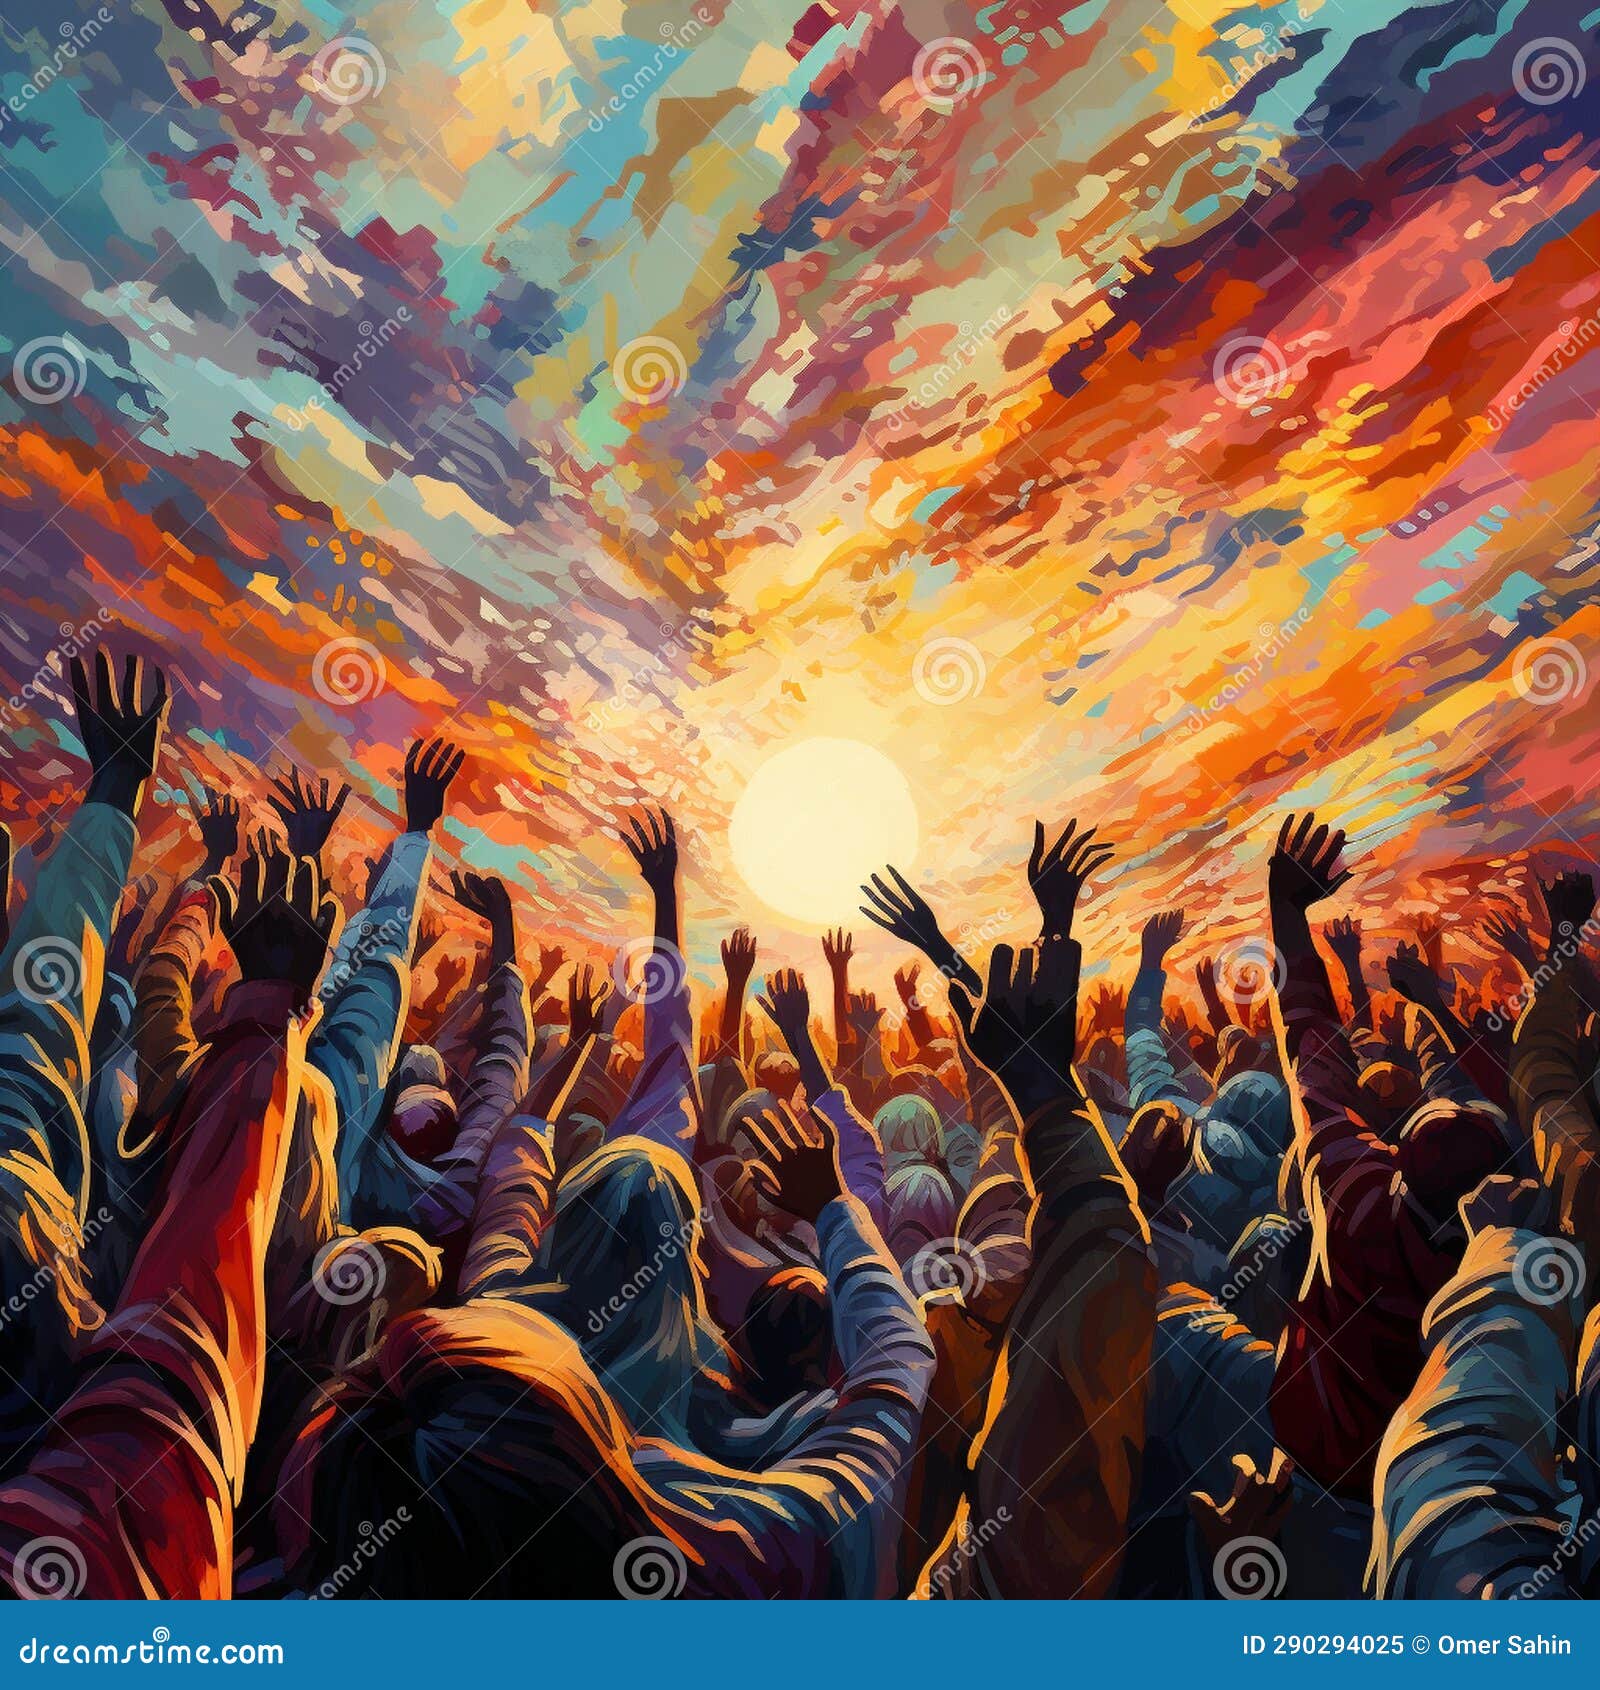 astonishing wallpaper: celestial crescendo - congregation lifting their hands in synchronized worship